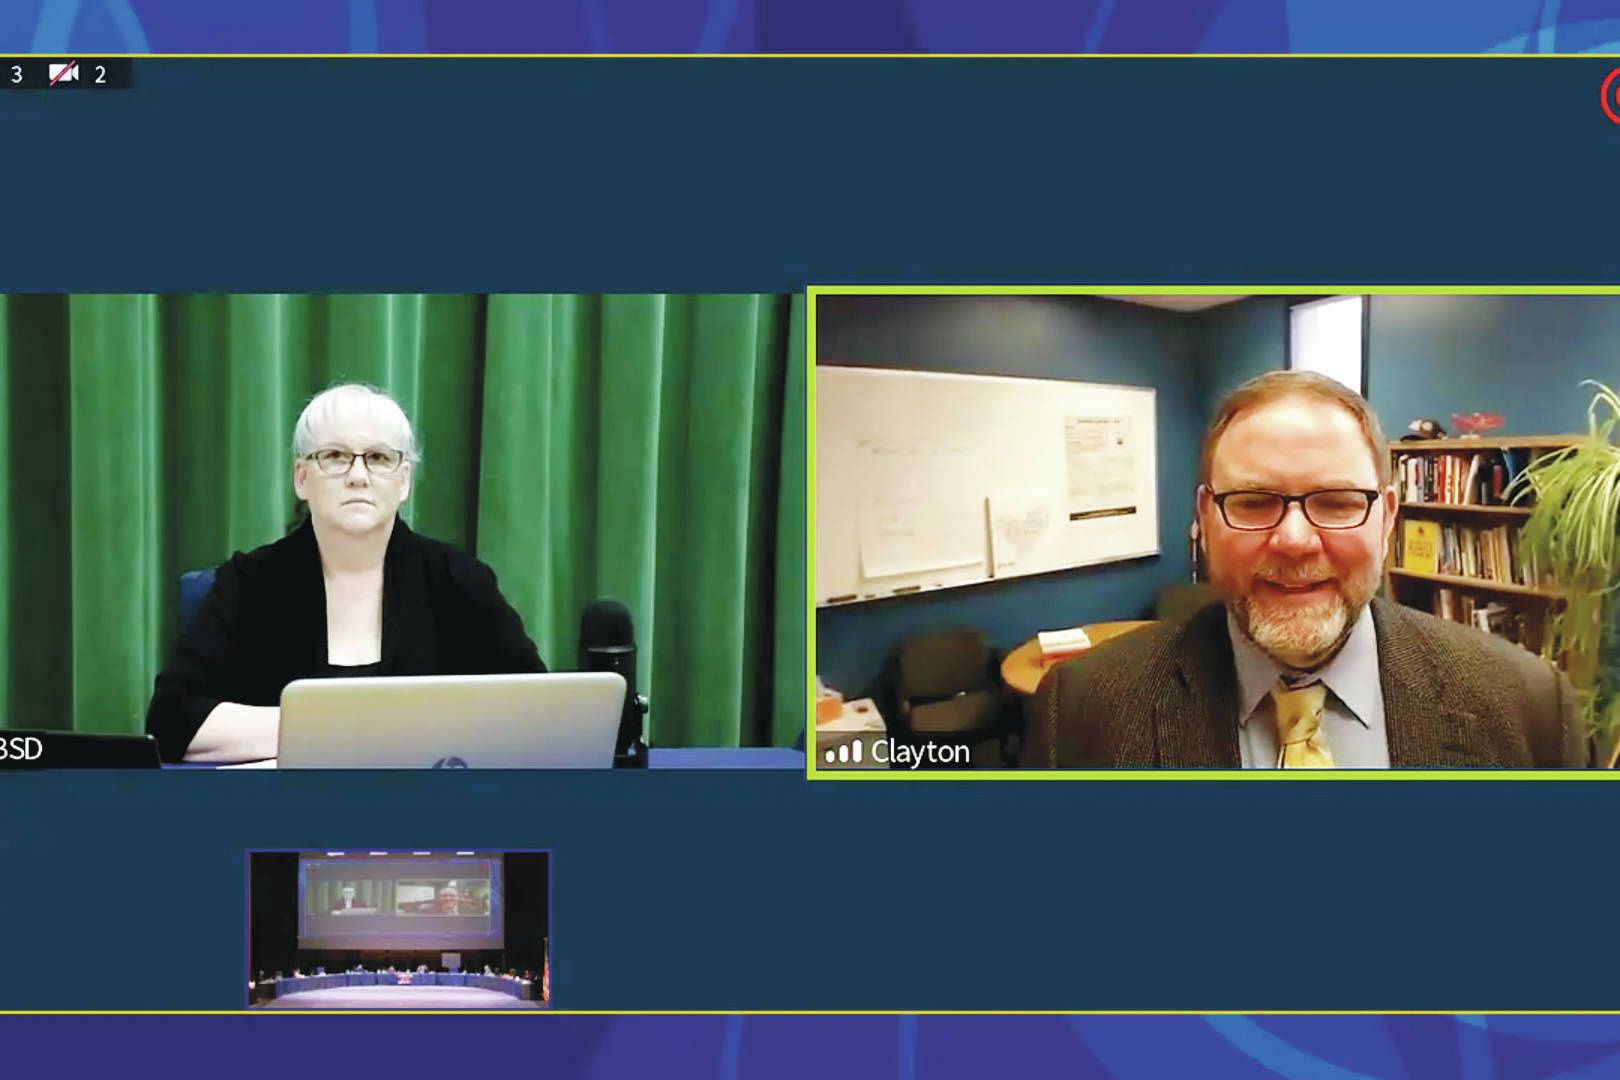 Screenshot 
Debbie Cary (left) moderates a virtual interview with Clayton Holland (right) on Tuesday, Jan. 26, 2021 in Kenai, Alaska.